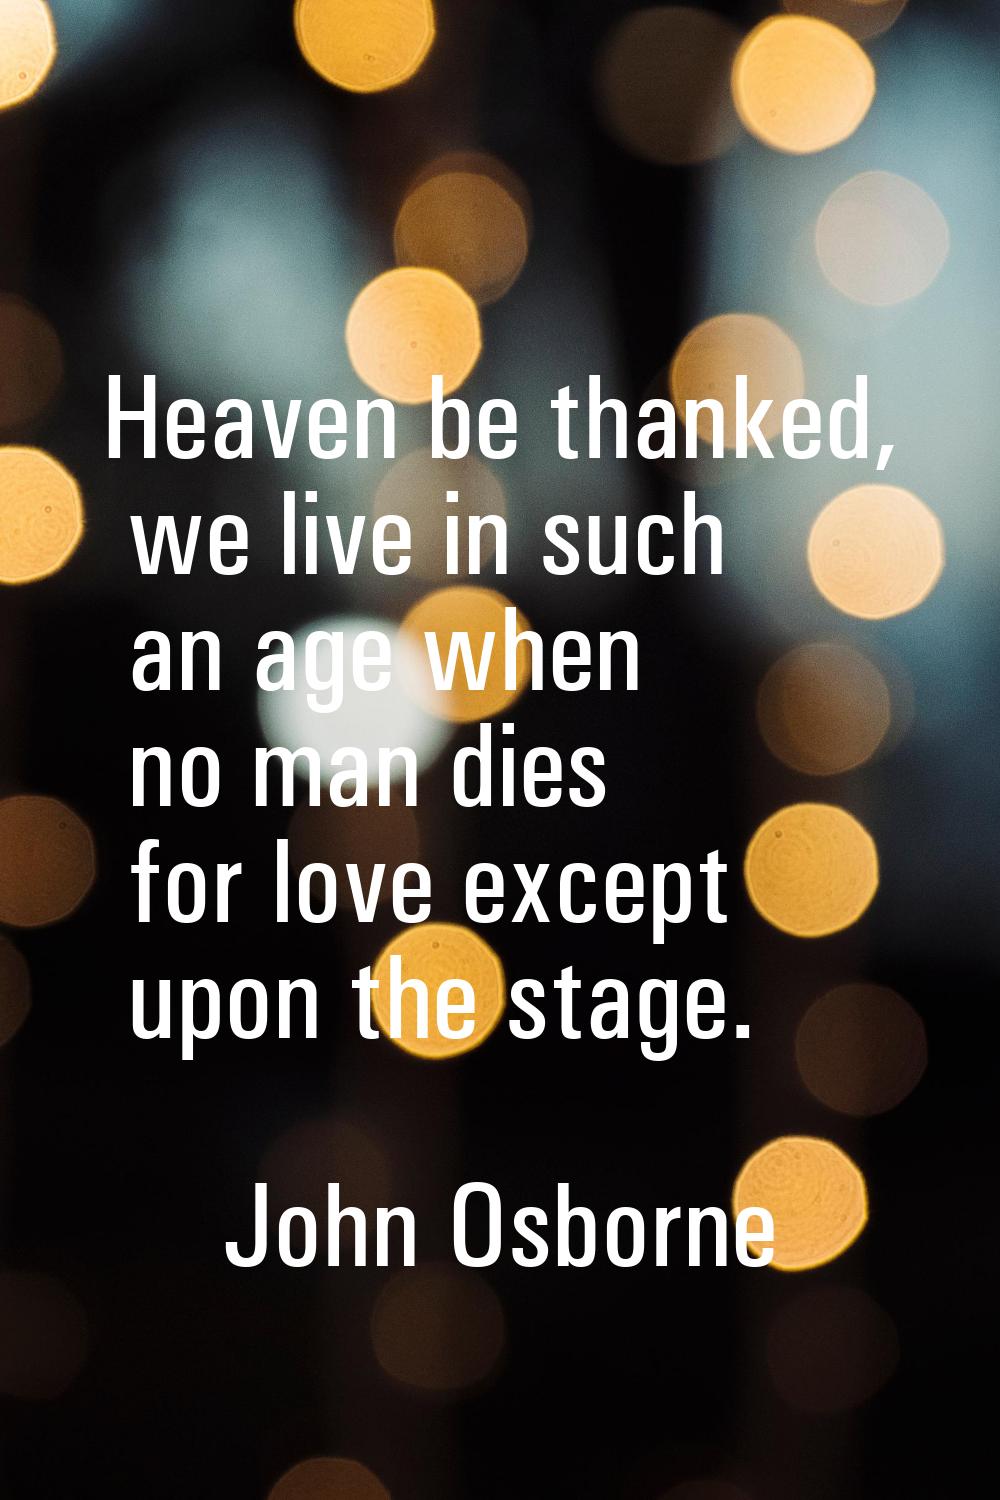 Heaven be thanked, we live in such an age when no man dies for love except upon the stage.